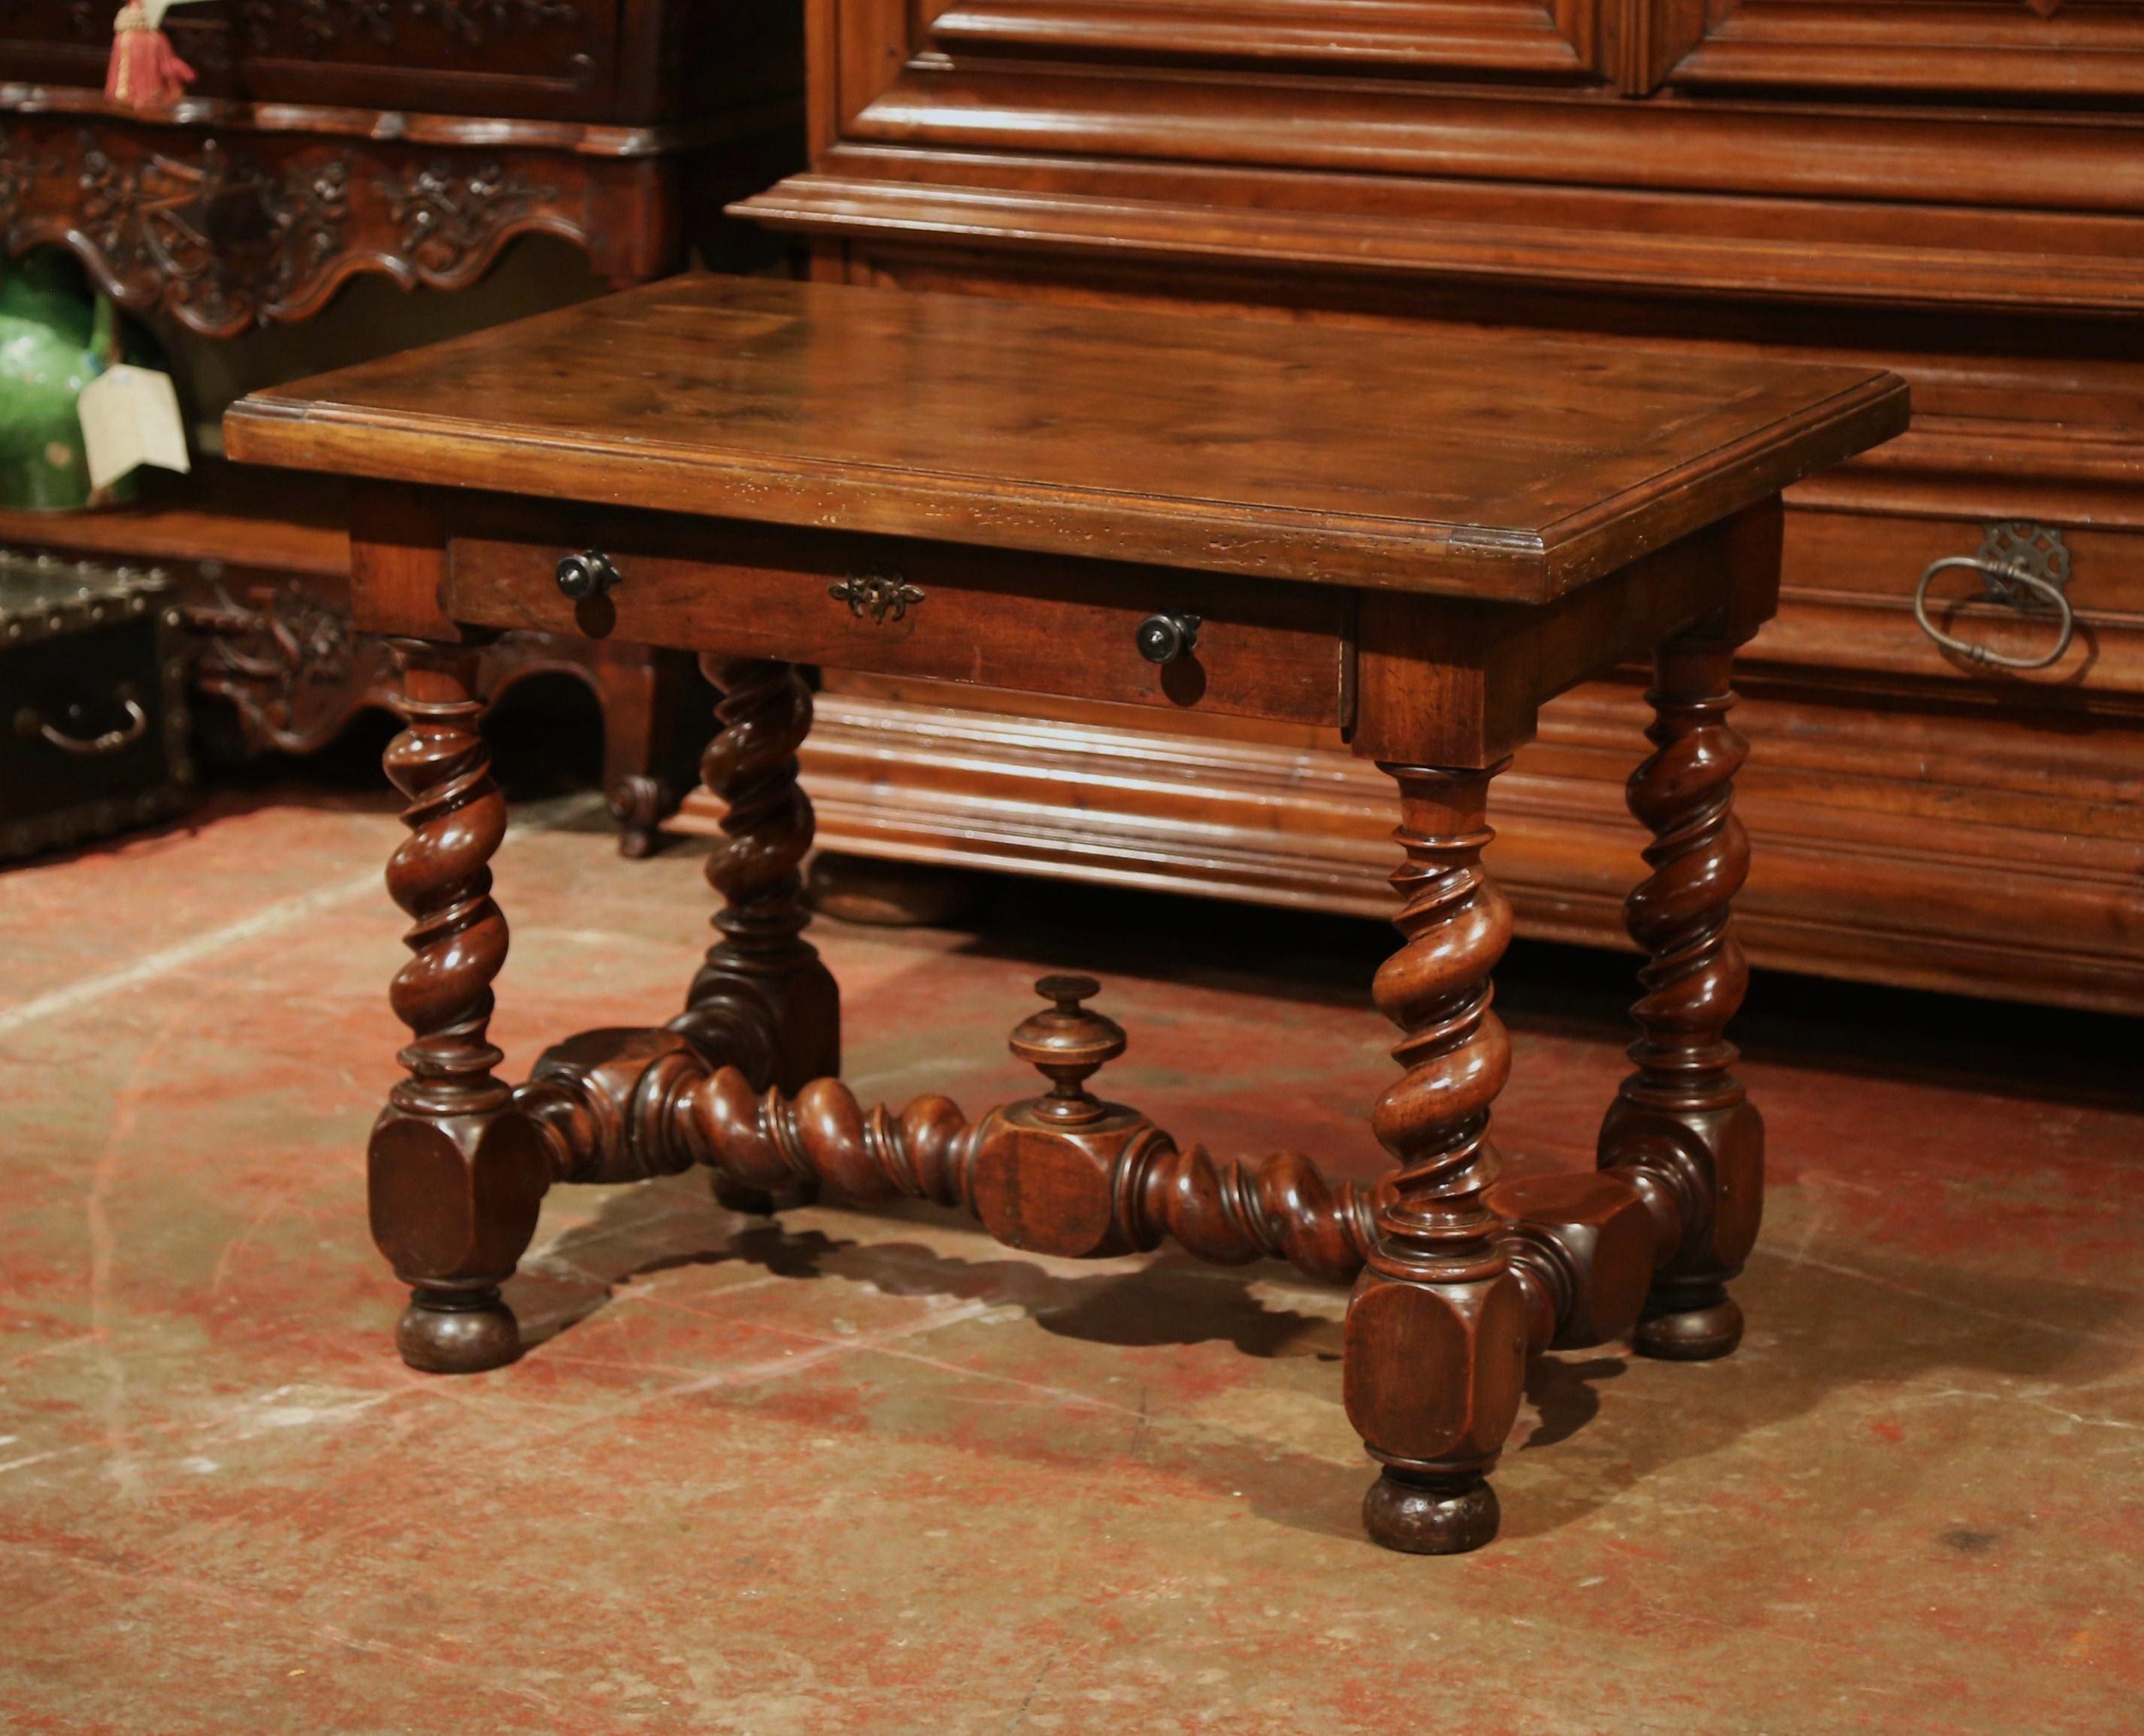 Hand-Carved 18th Century, French, Louis XIII Carved Walnut Table Desk with Barley Twist Legs